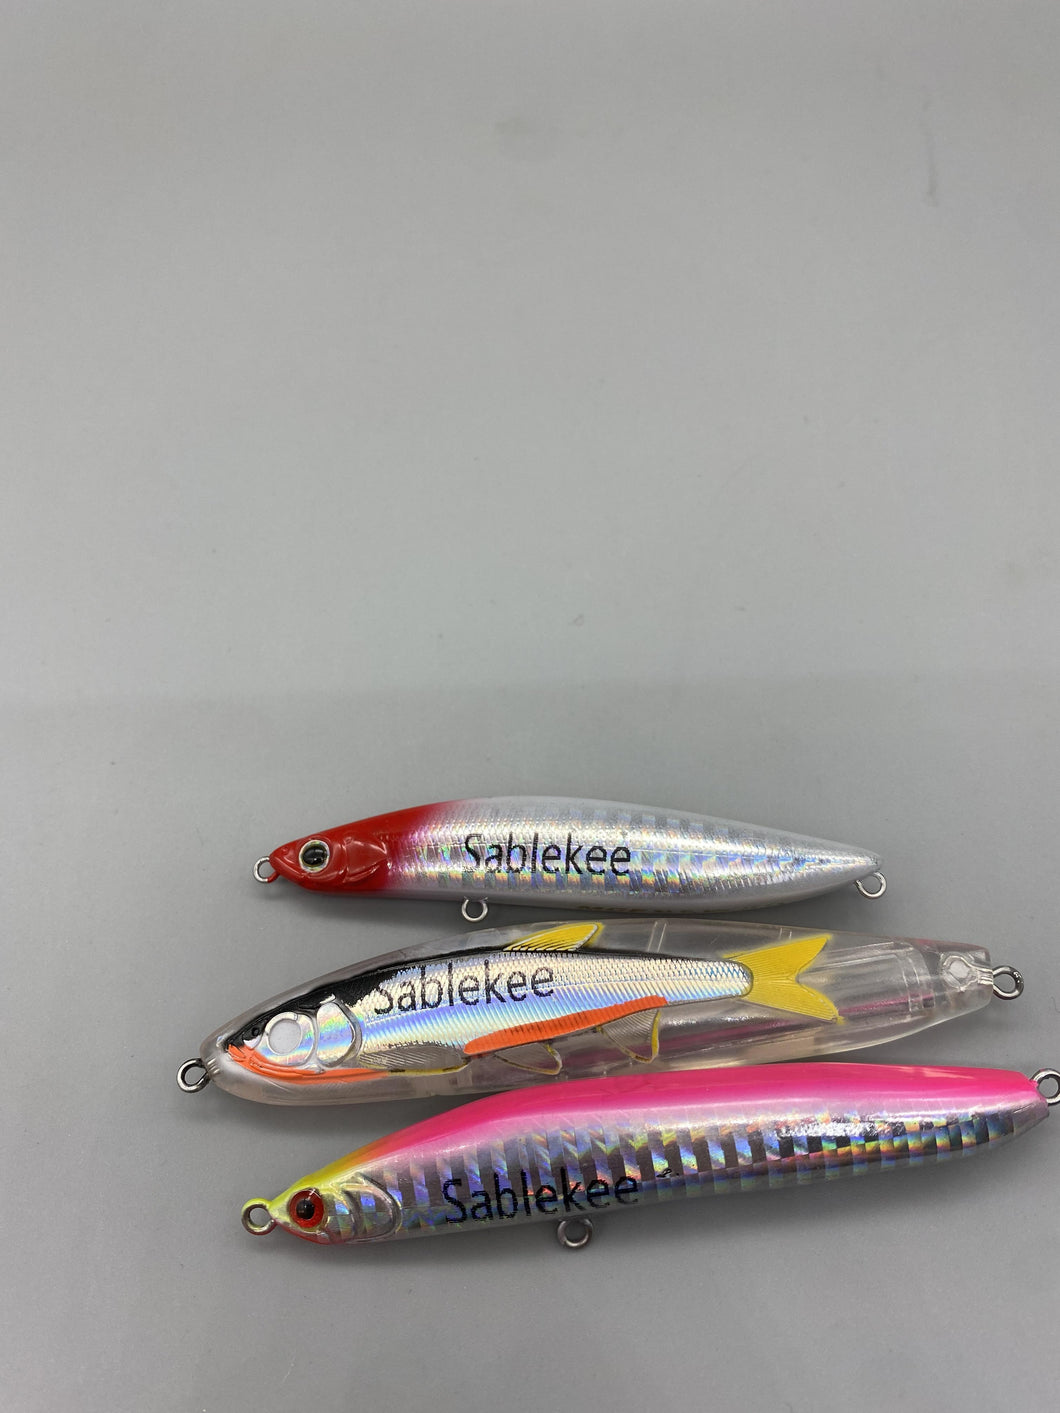 Sablekee Artificial baits for fishing,Multiple Simulated Fishing Soft Bait Swimbaits Slow Sinking Swimming Lures Freshwater and Saltwater，Stable and Tempting,Bass Fishing Lures Swim Baits for Freshwater with Segmented, Bionic Swimming, Swimbaits and Lure